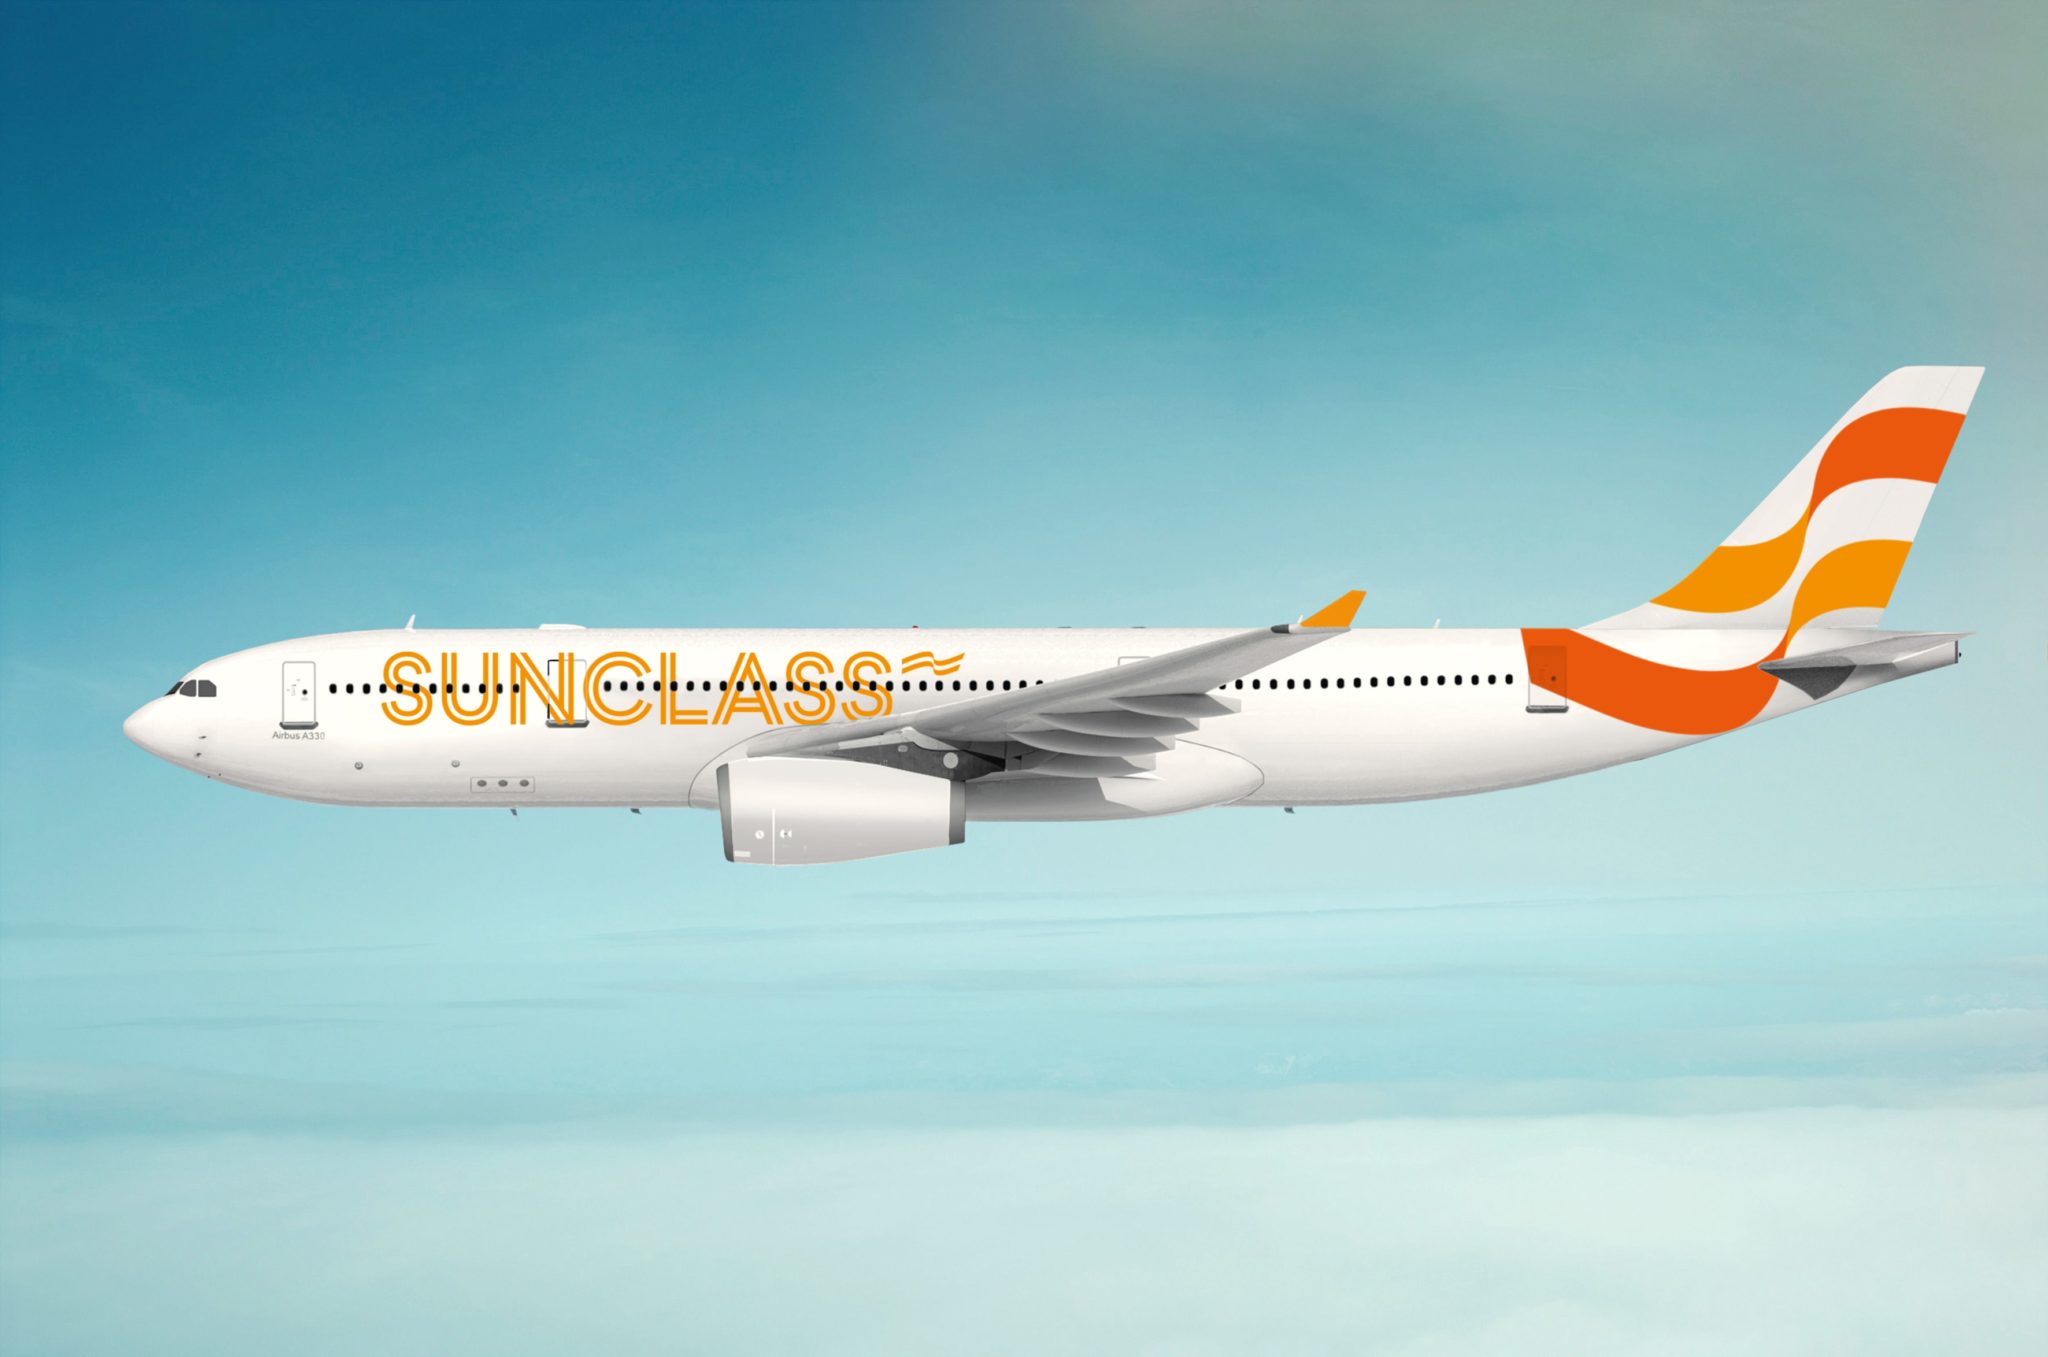 13-facts-about-sunclass-airlines